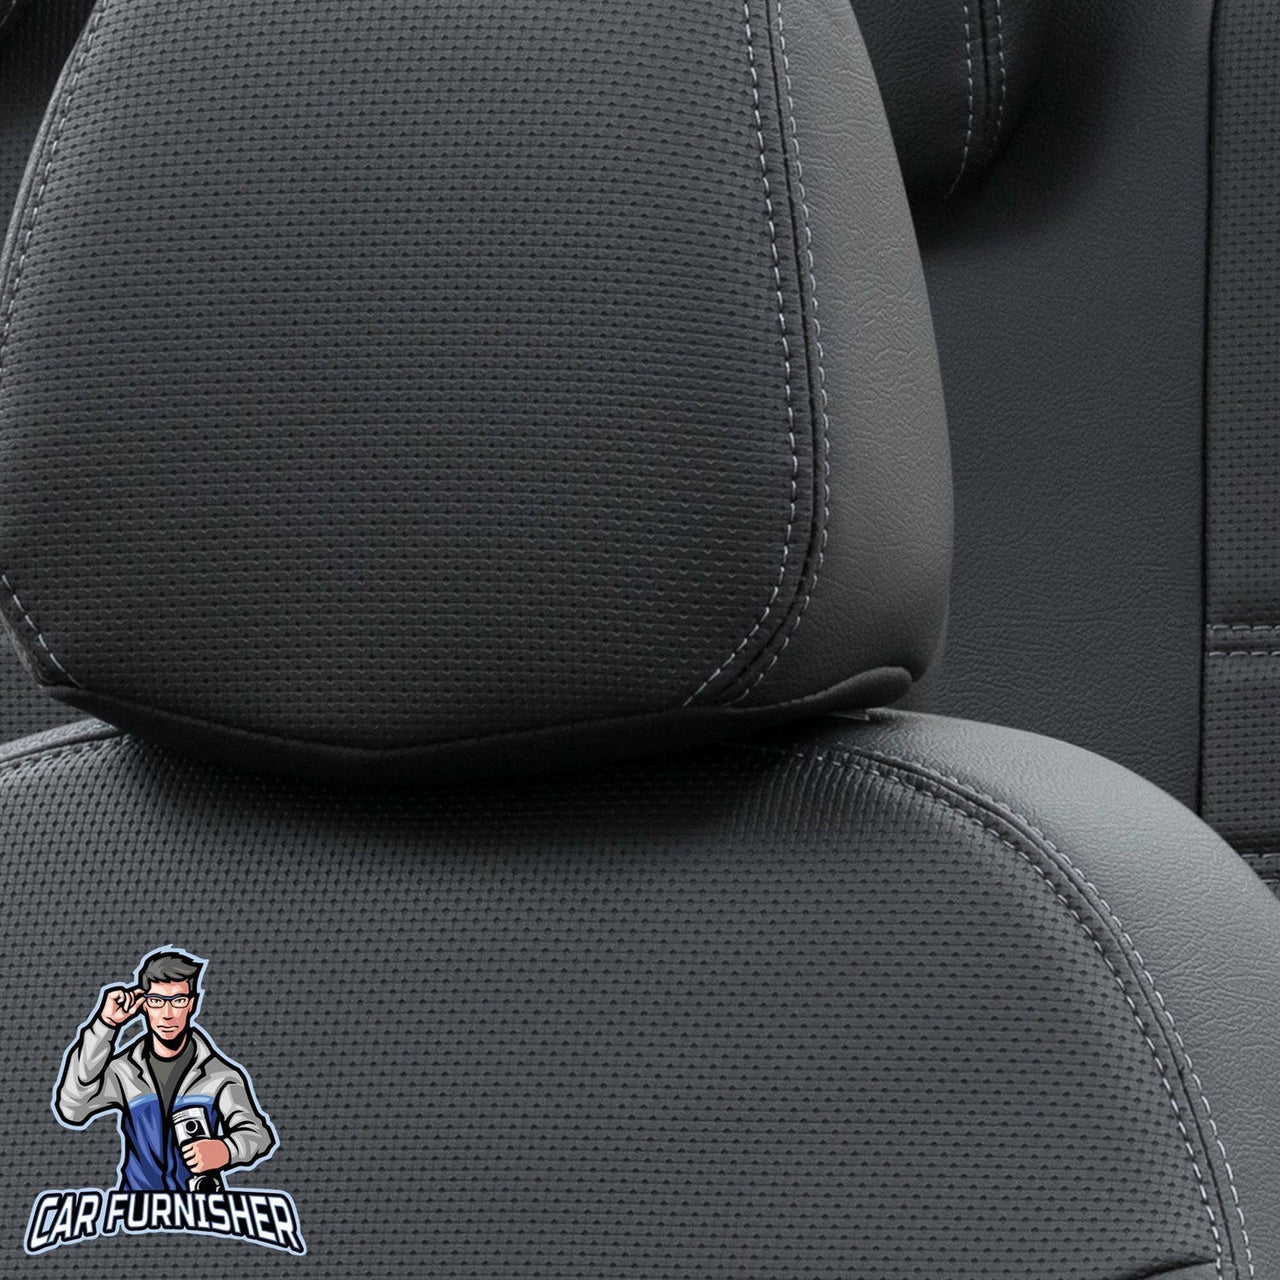 Bmw 3 Series Seat Cover New York Leather Design Black Leather